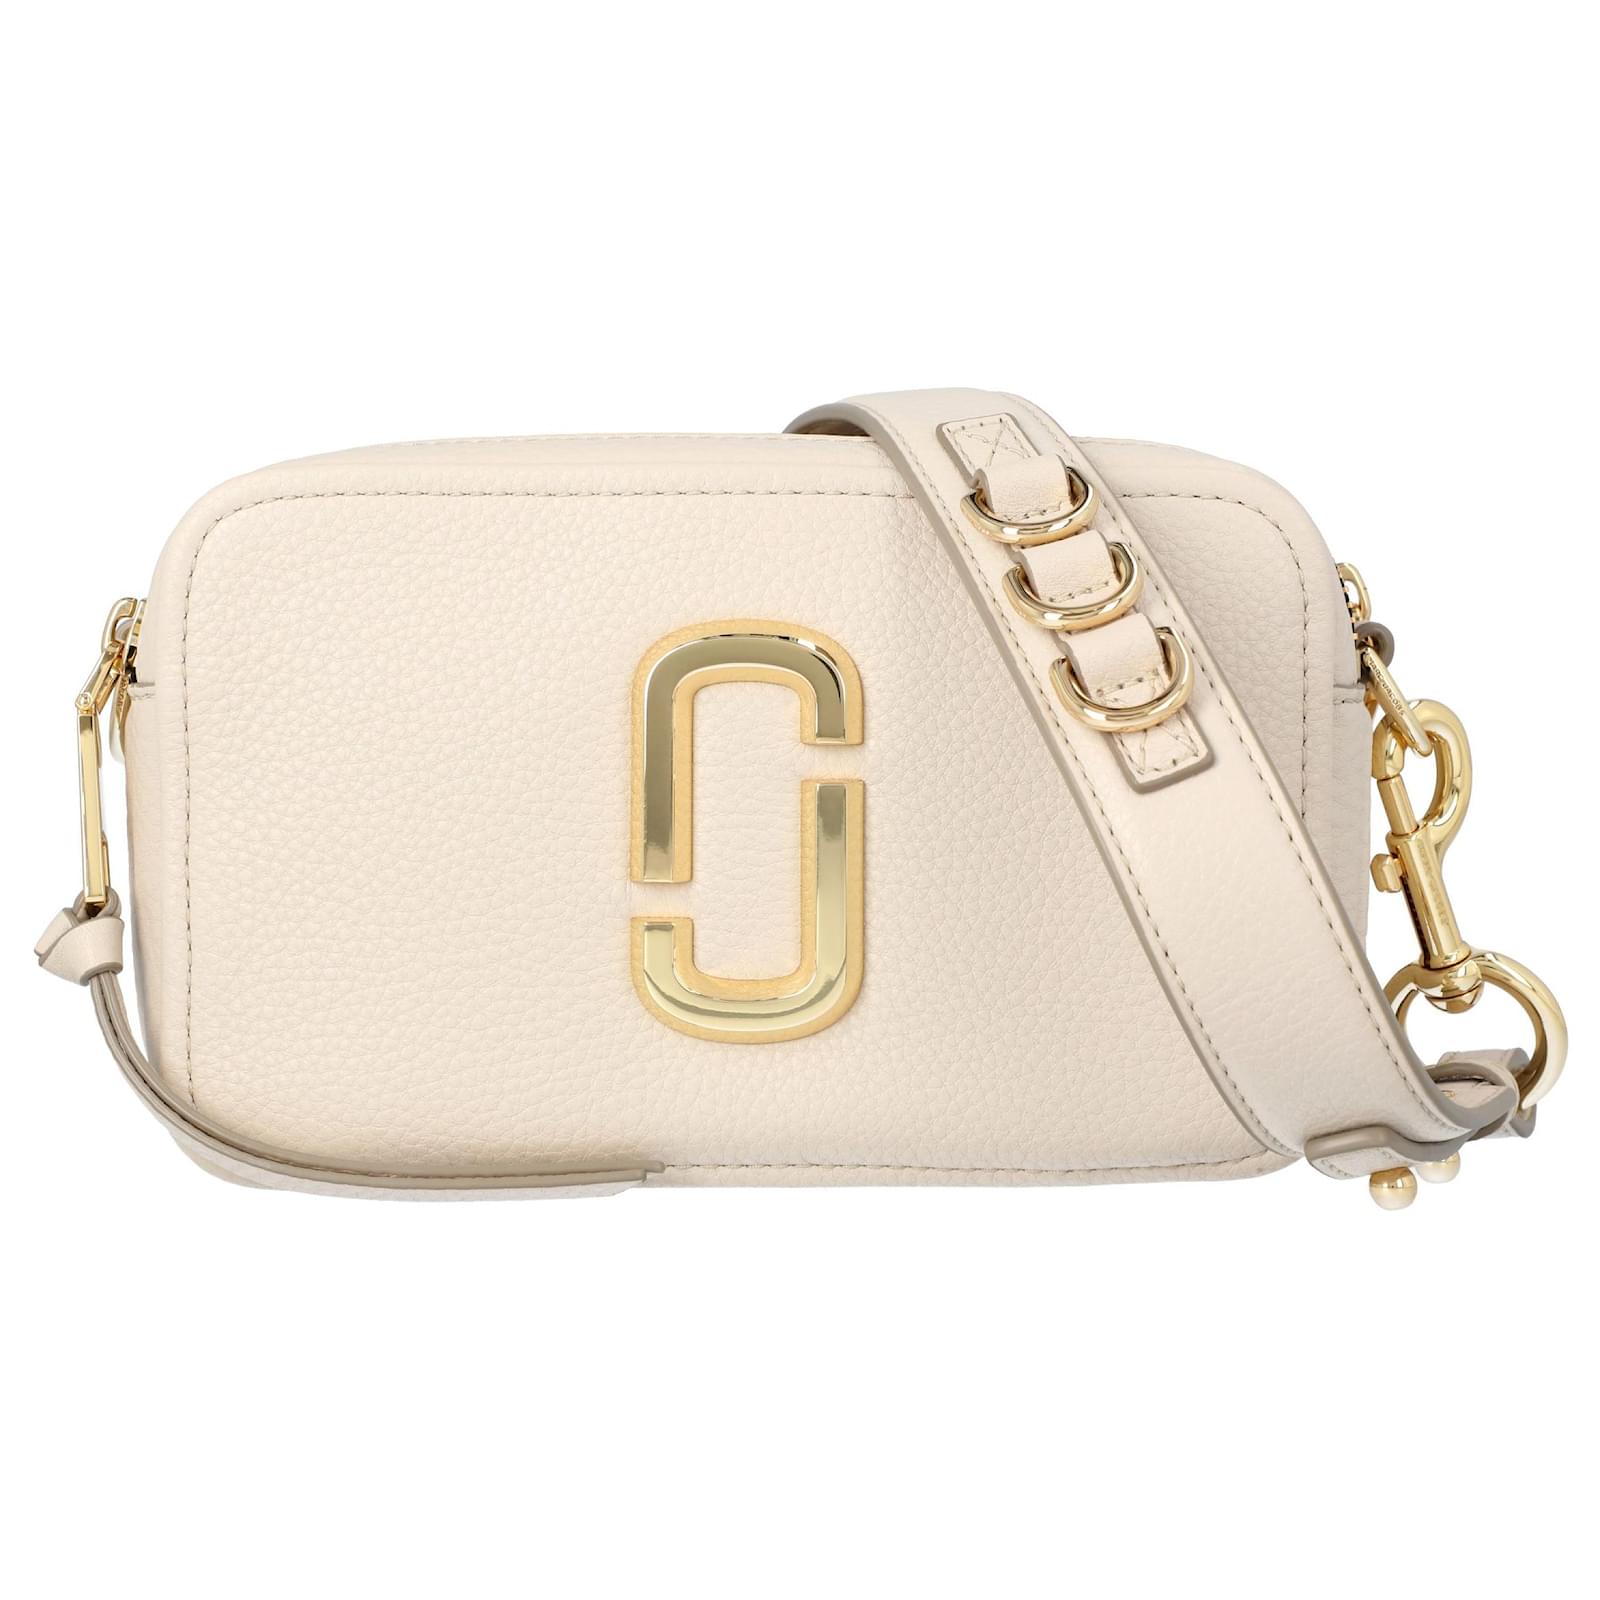 The Snapshot Leather Camera Bag in Beige - Marc Jacobs